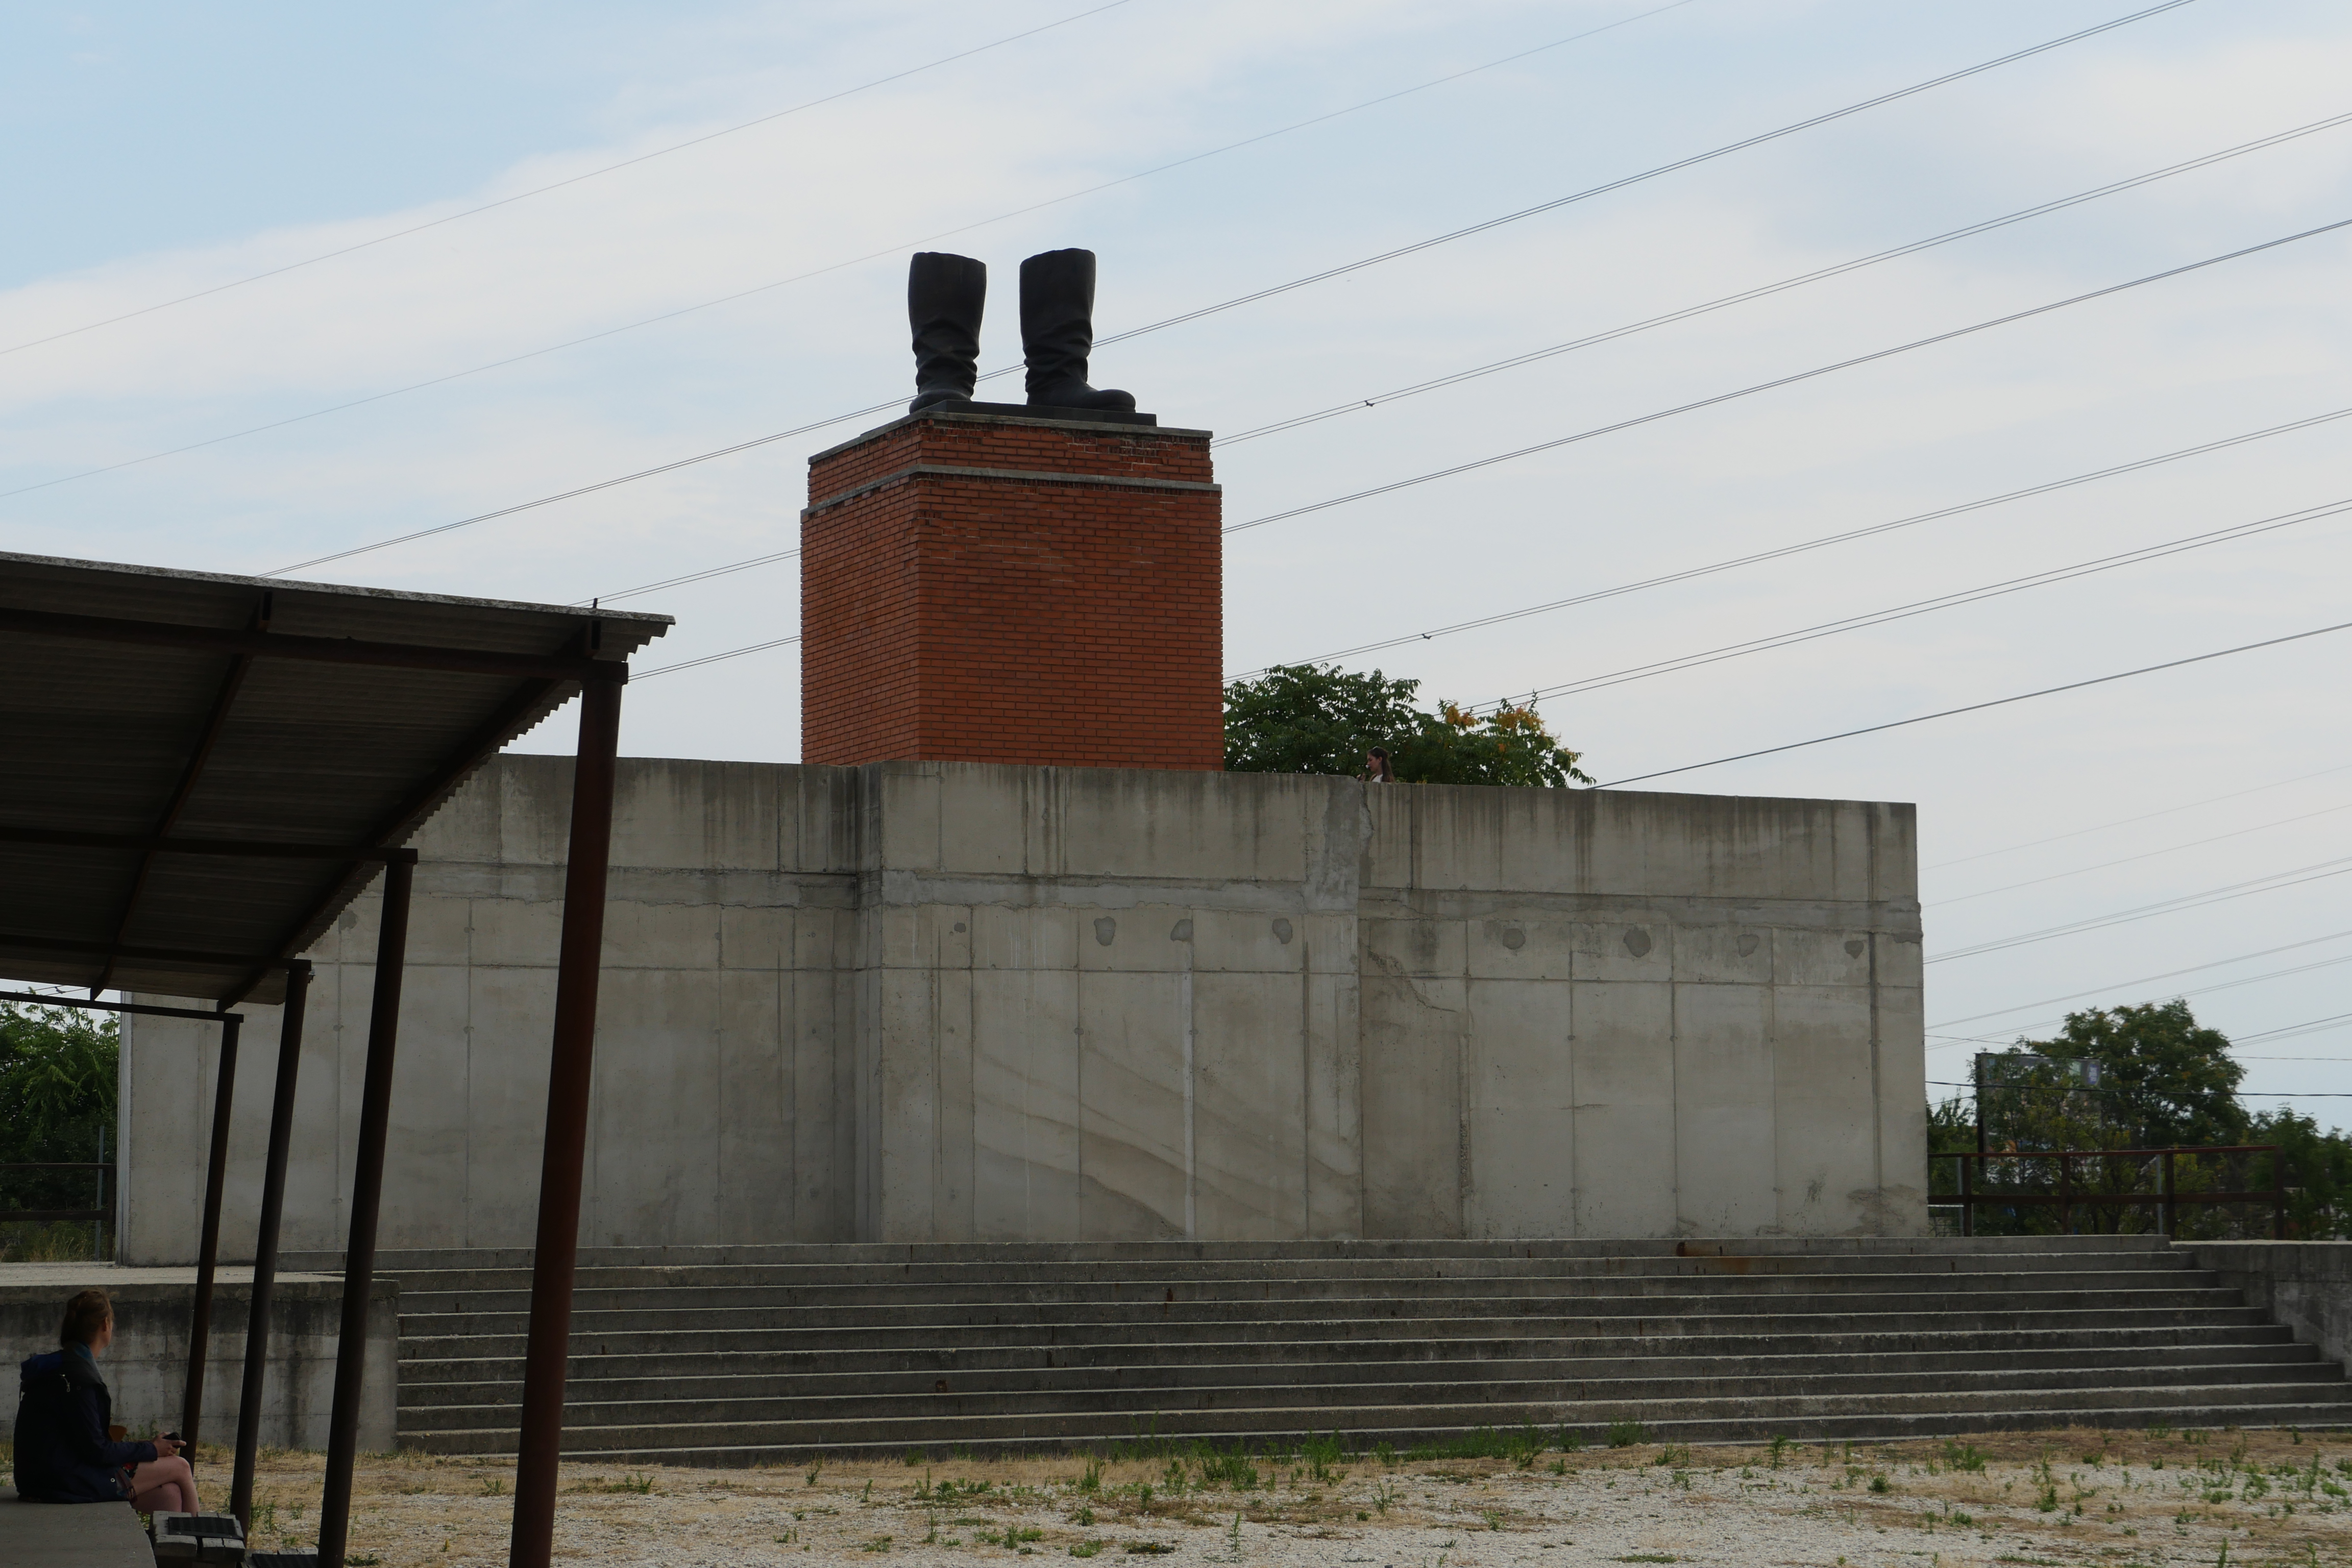 Photo of Stalin's boots on huge grandstand at Memento Park, Hungary